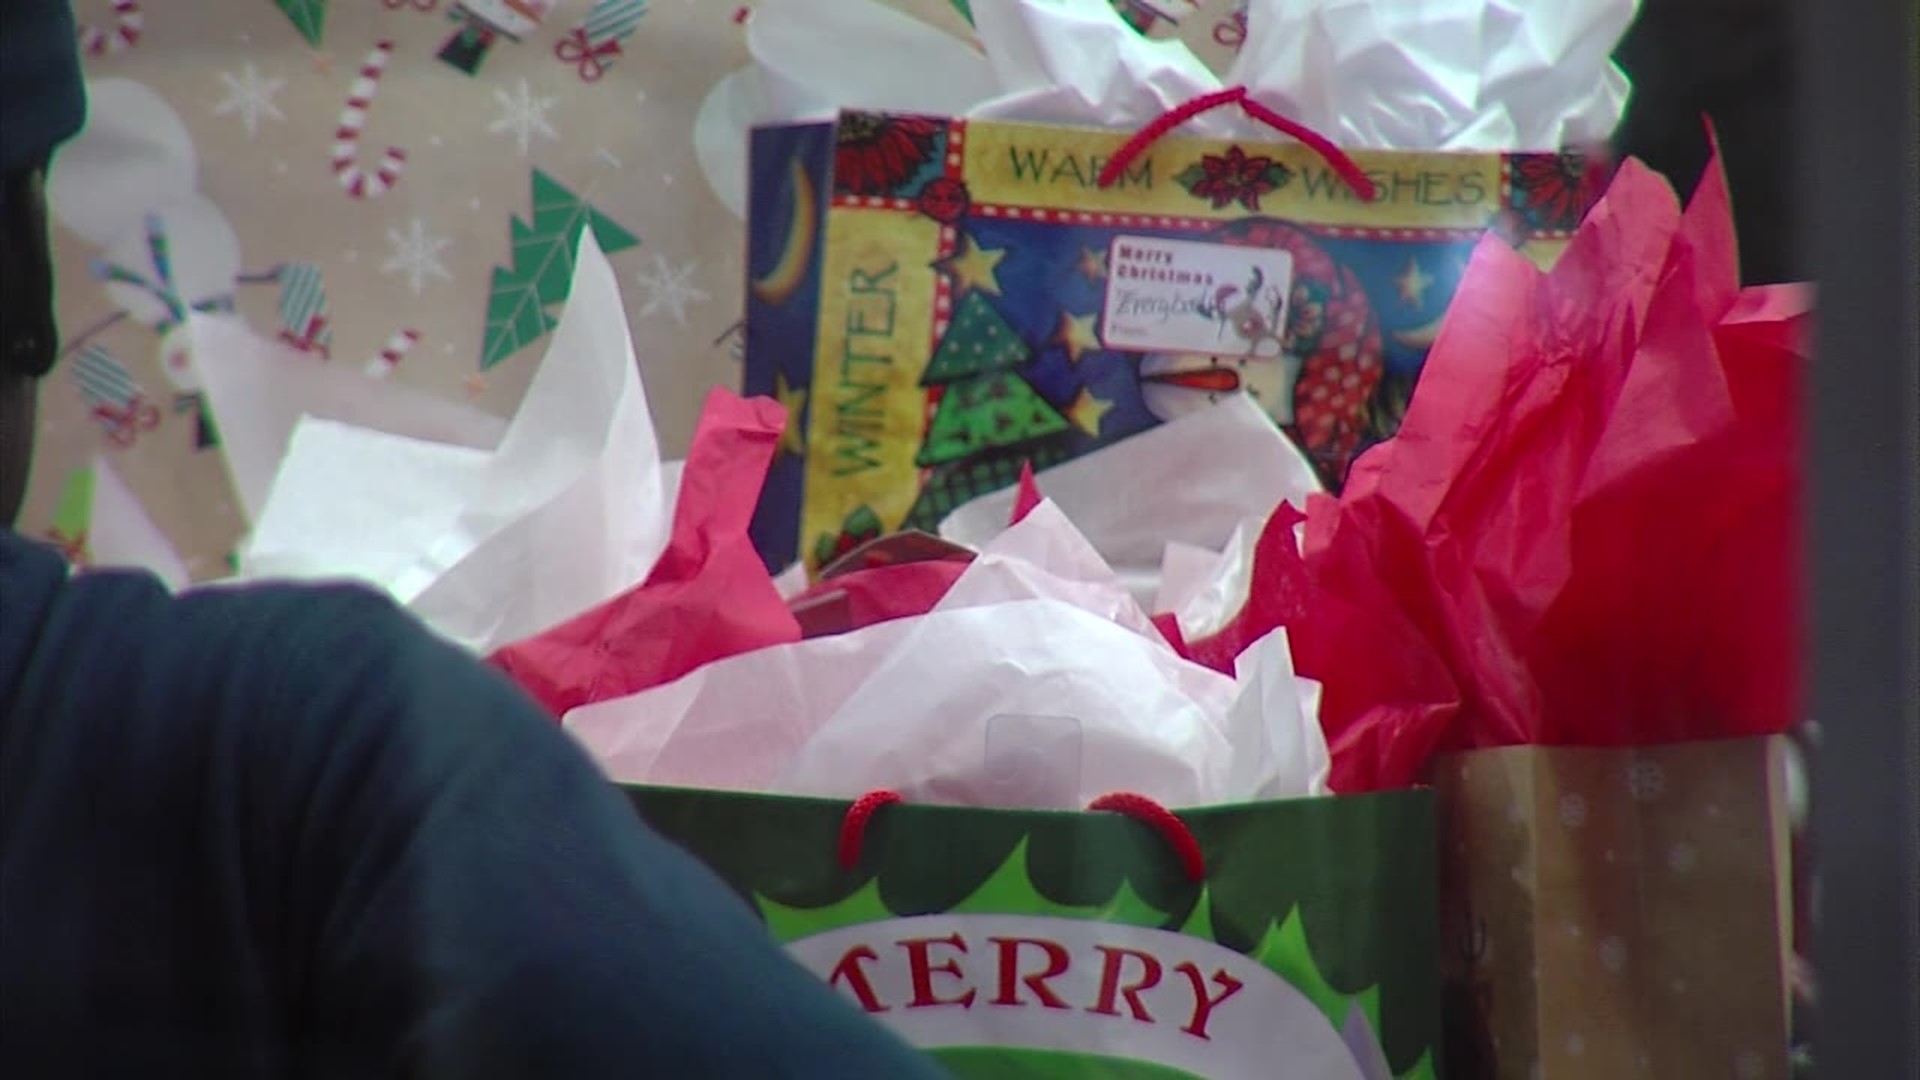 MAM's Christmas Store provides $20,000 to parents for gifts